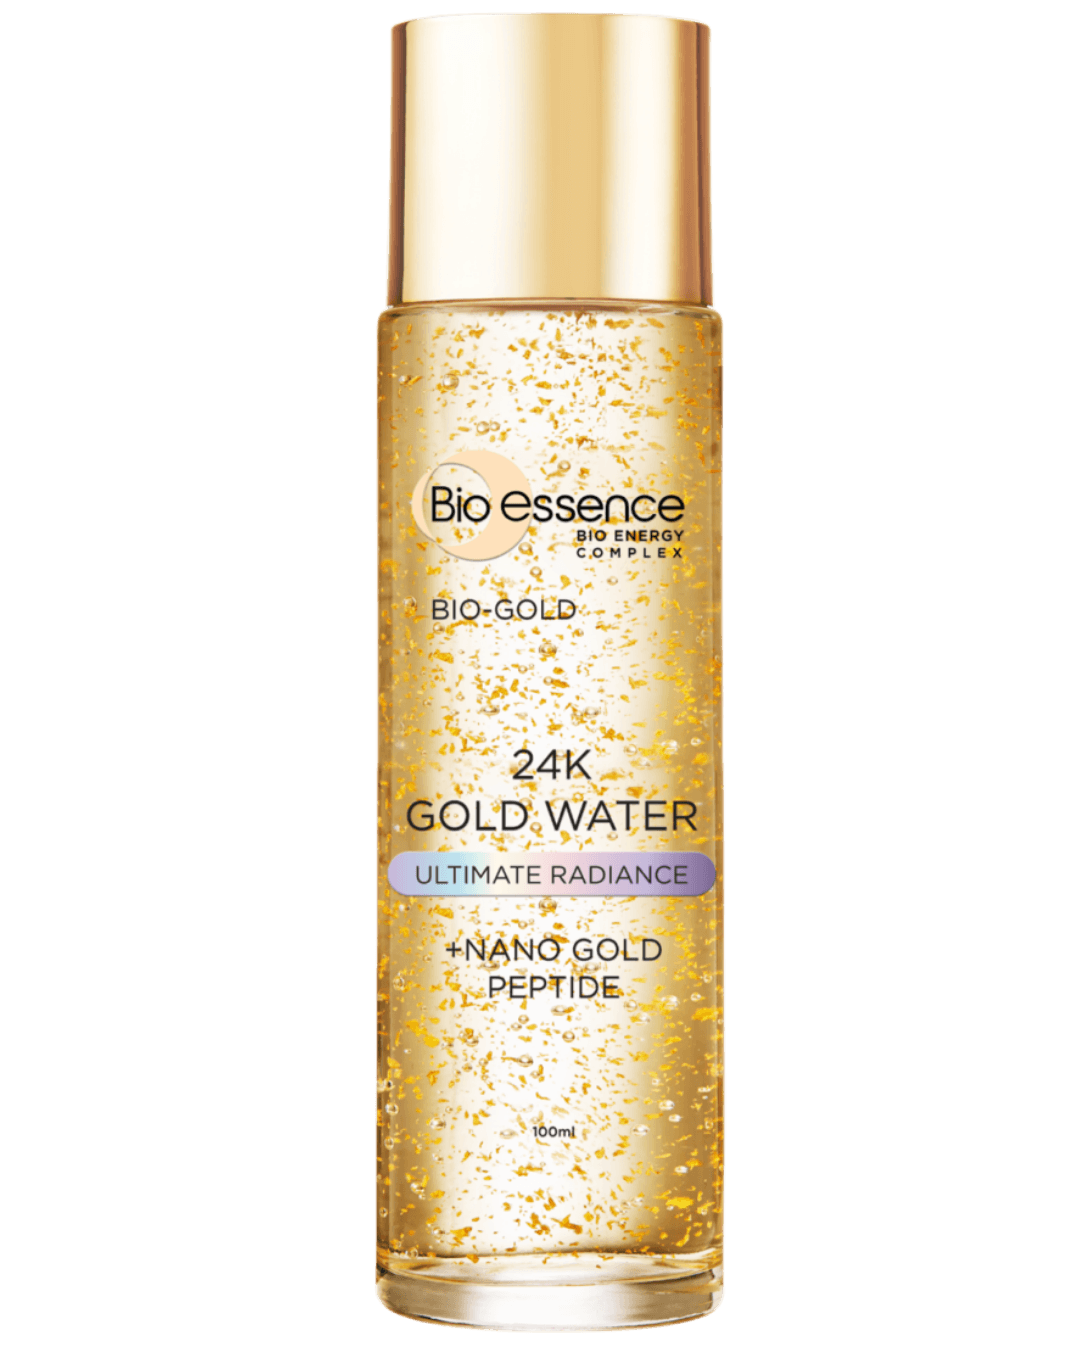 Daily Vanity Beauty Awards 2024 Best Skincare Bio-essence Bio-Gold 24K Gold Water Voted By Beauty Experts